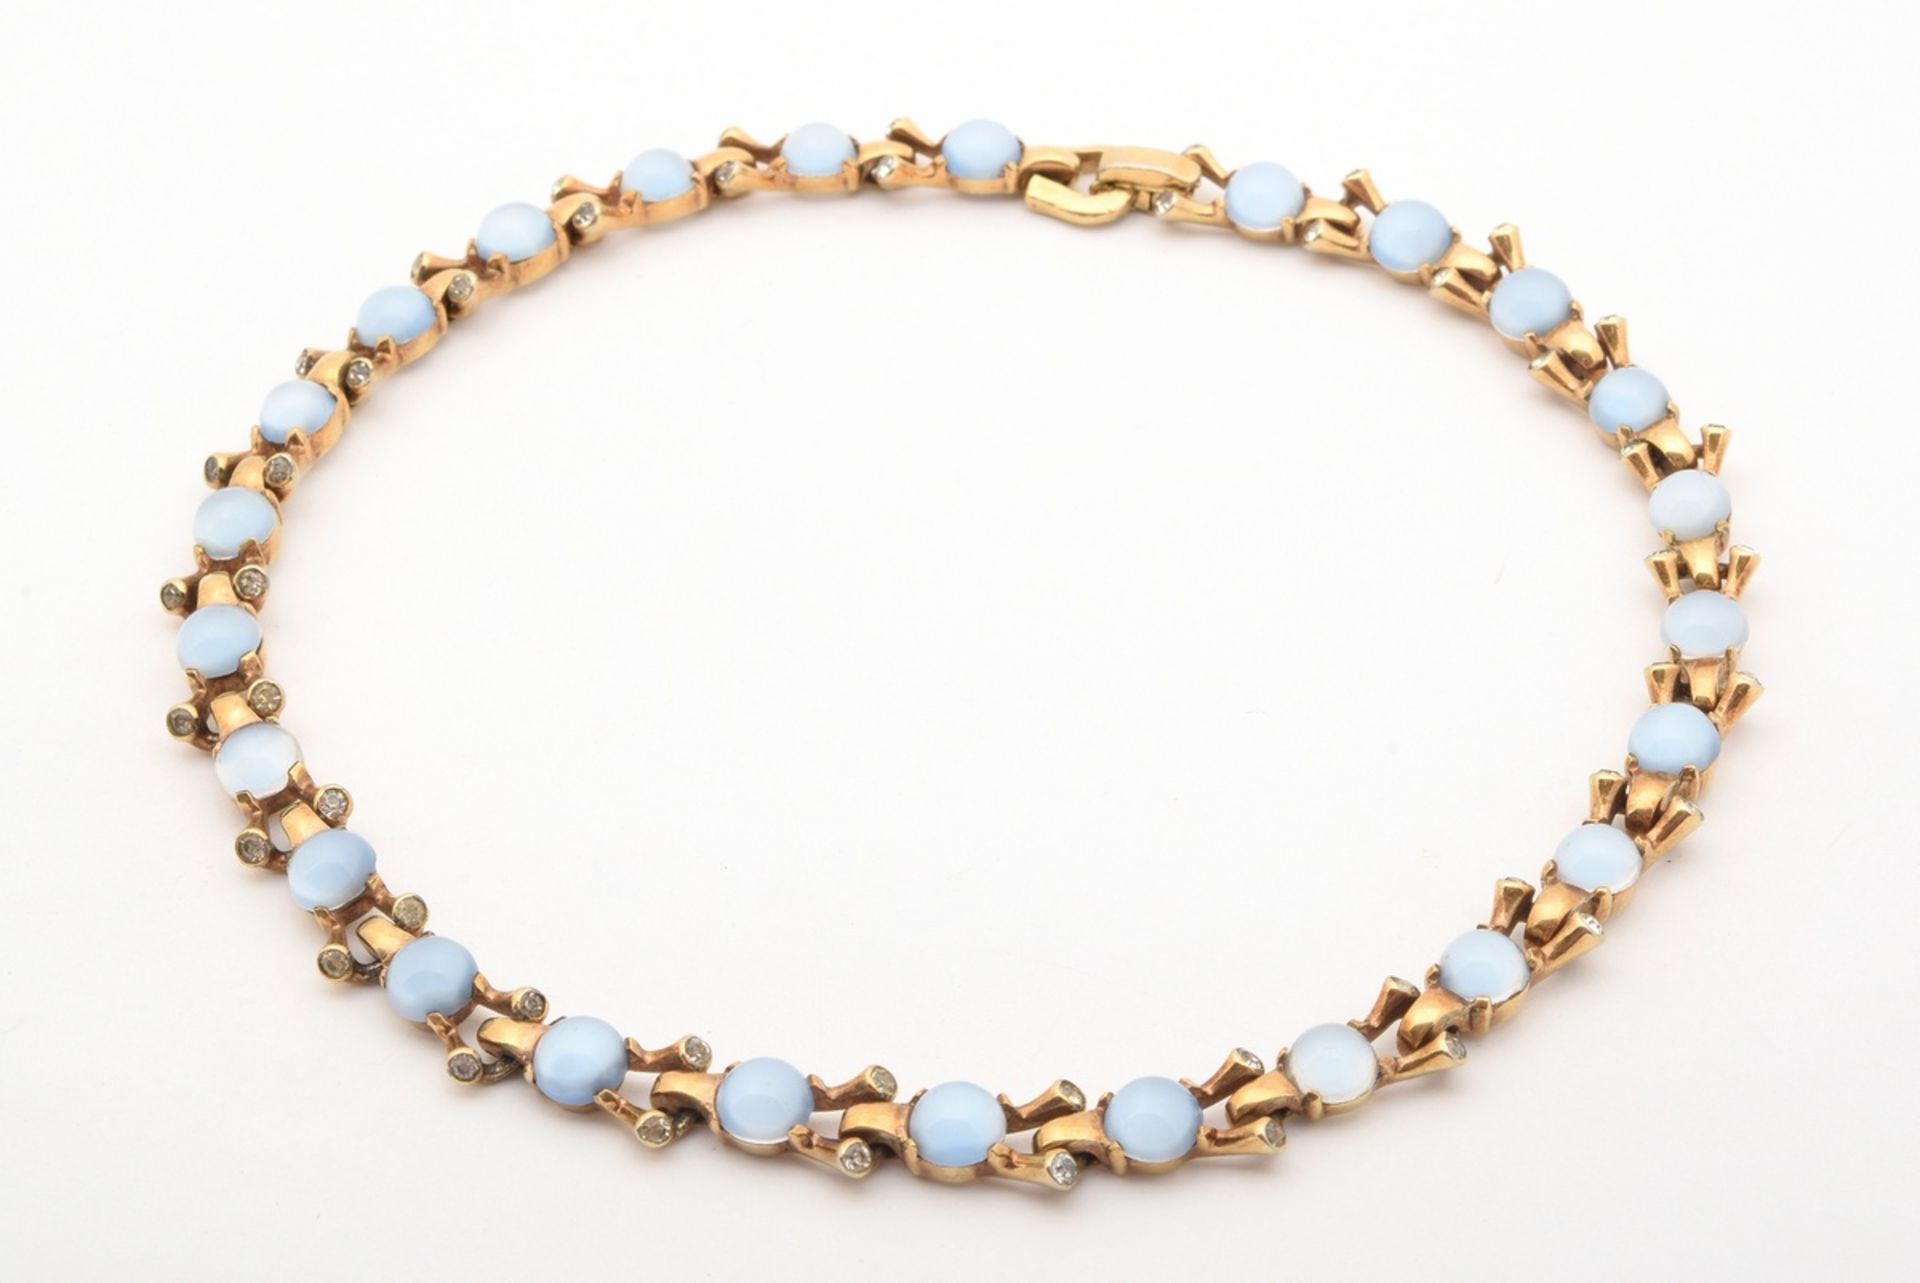 6 pieces of gold-plated light blue/beige fashion/costume jewellery made of glass and artificial pea - Image 10 of 12